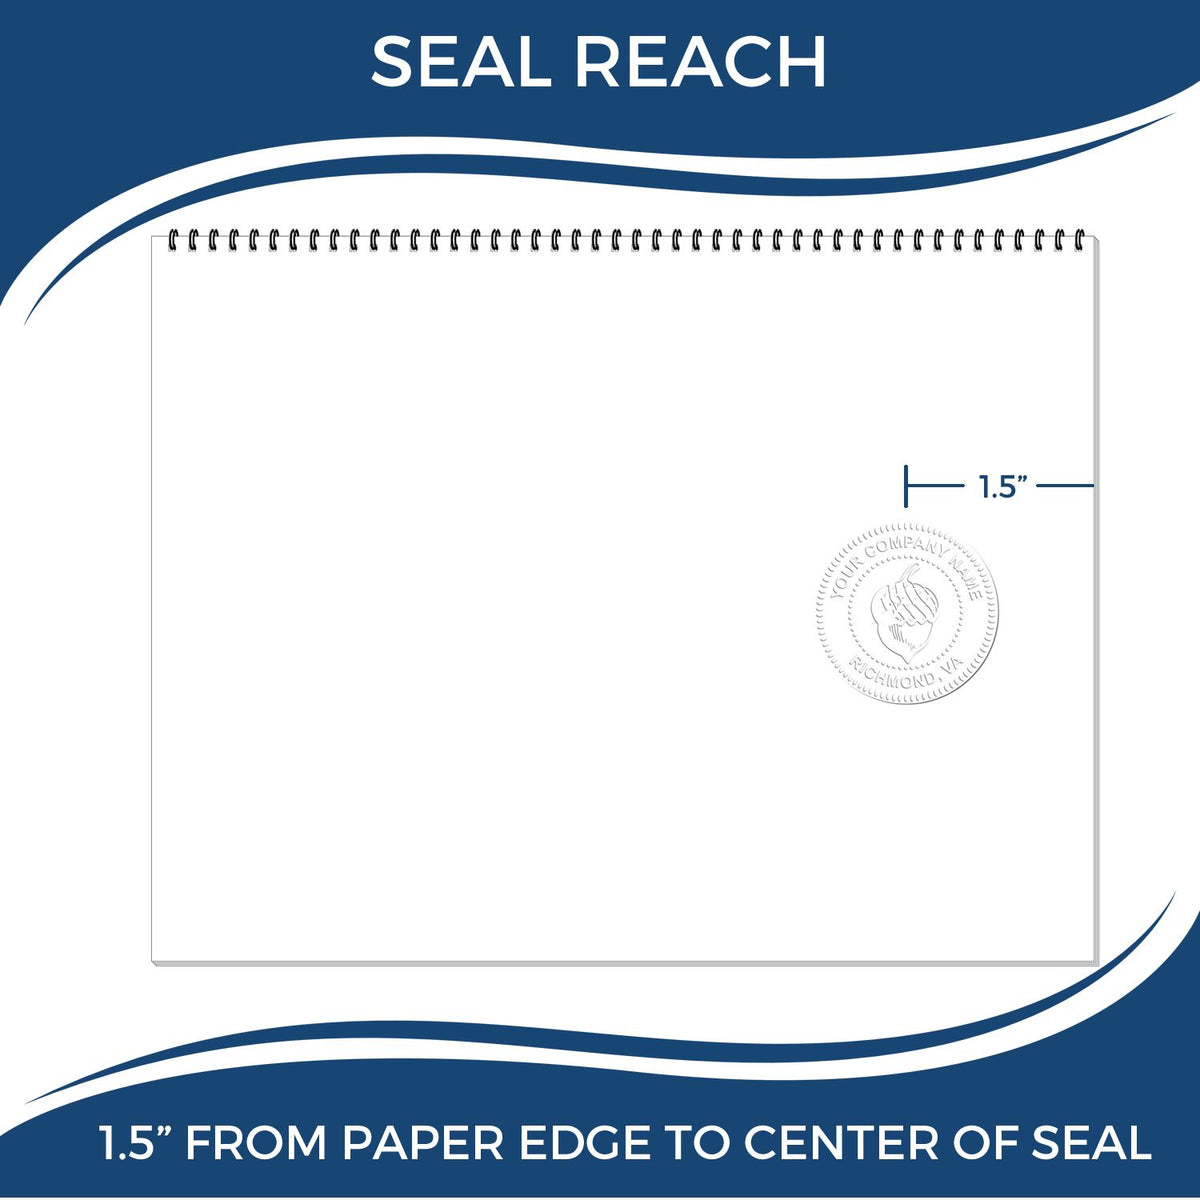 An infographic showing the seal reach which is represented by a ruler and a miniature seal image of the Gift New Hampshire Architect Seal